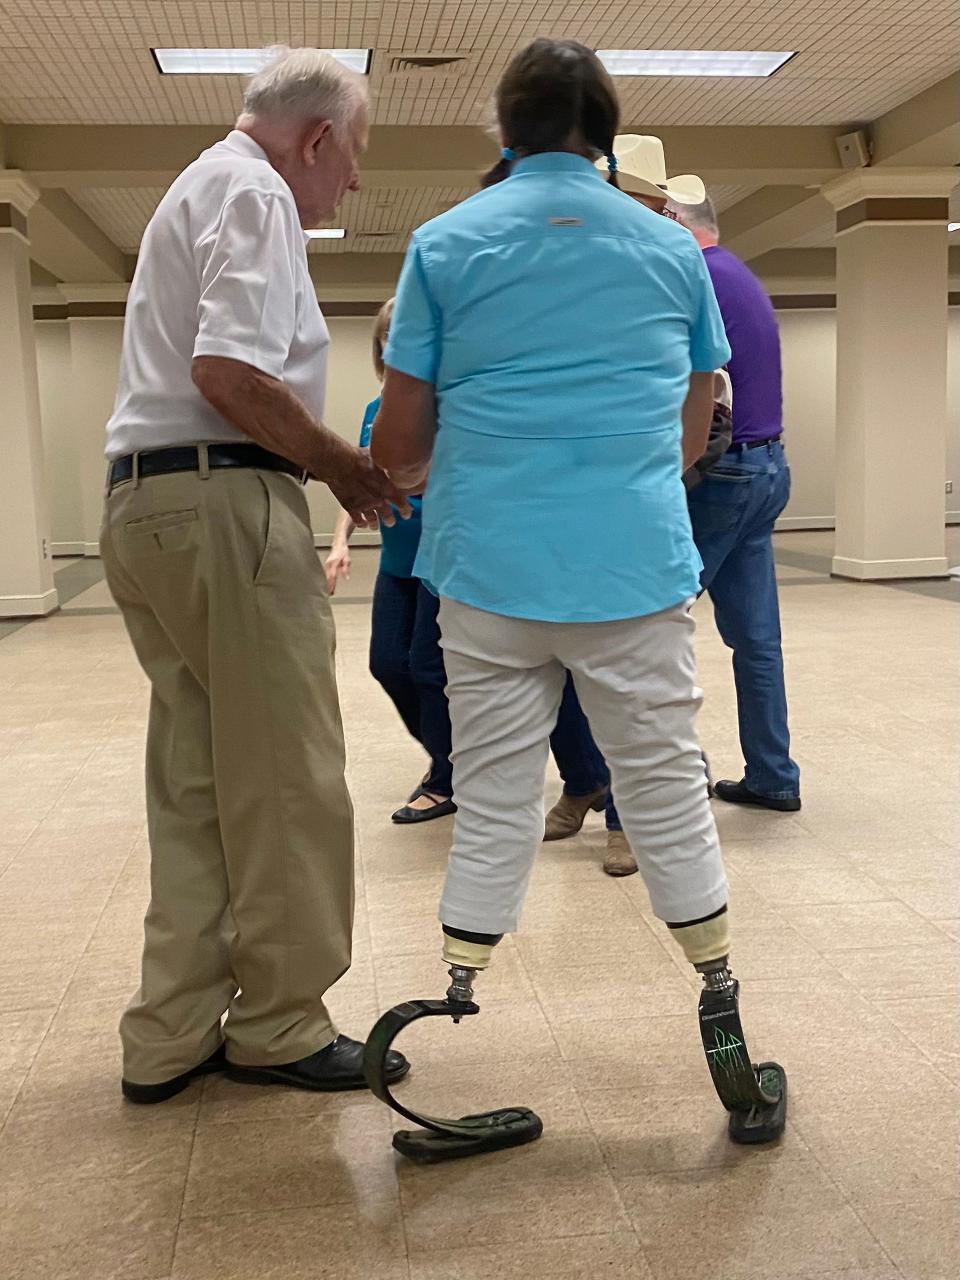 Priscilla Newton, on her prosthetic blades, takes part in a recent square dancing event at Gadsden's Downtown Civic Center.